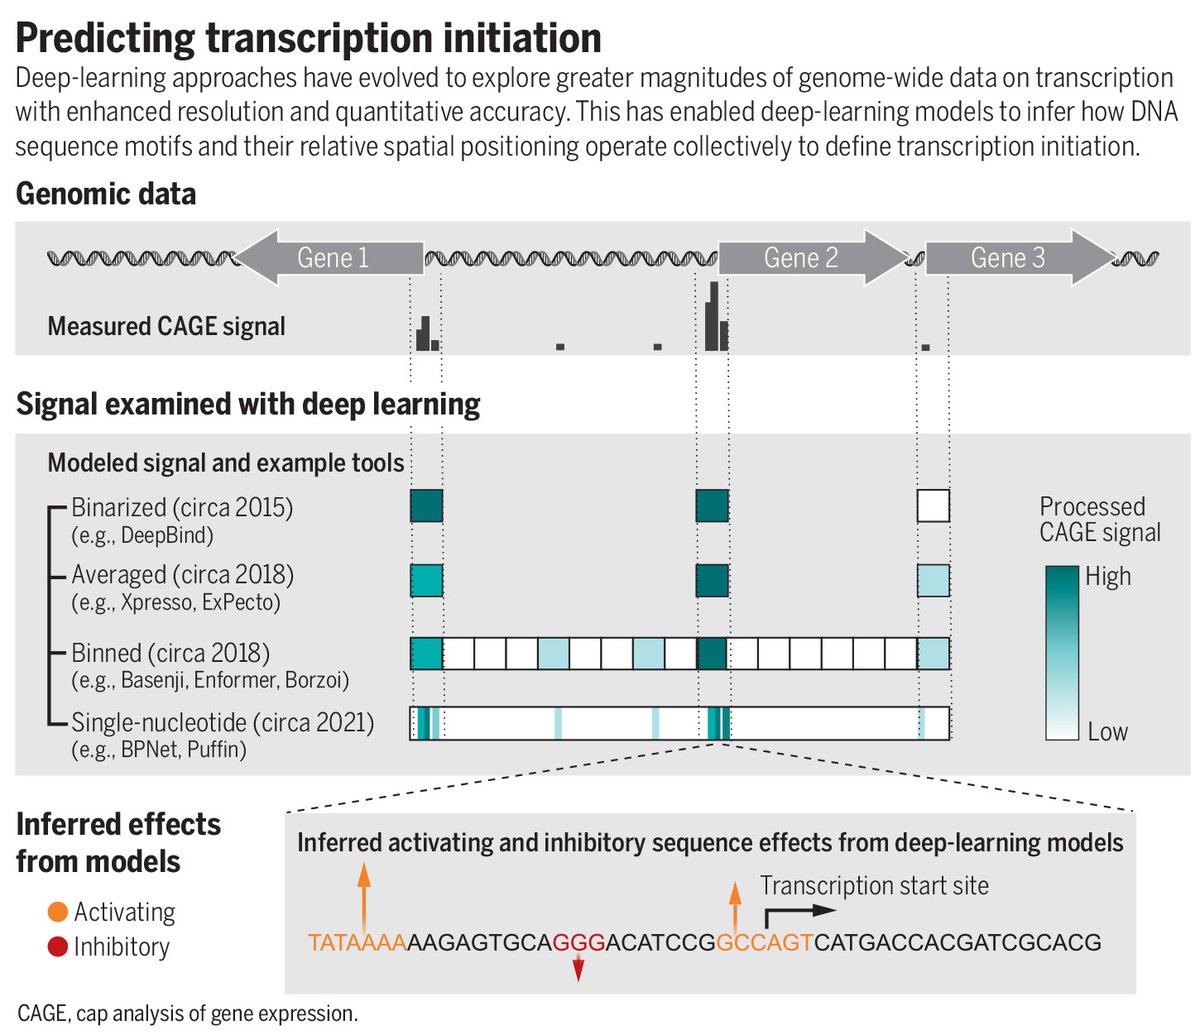 A new Science study defines a set of rules that govern transcription initiation and highlights the potential of using #DeepLearning approaches to understand how information is genetically encoded.

Learn more in a new #SciencePerspective: scim.ag/6OK